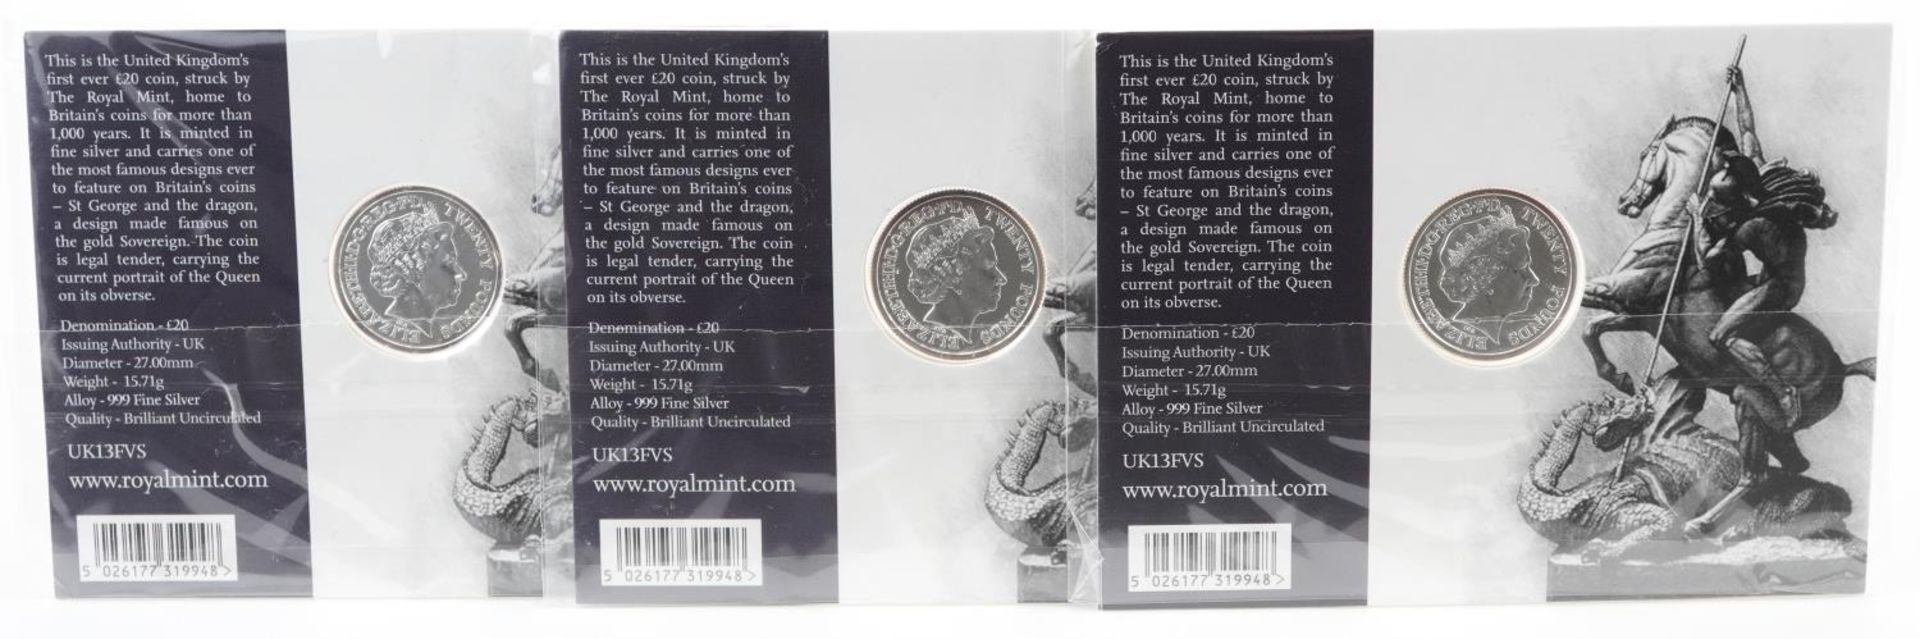 Three Elizabeth II 2013 George and the Dragon twenty pound fine silver coins by The Royal Mint - Image 3 of 4